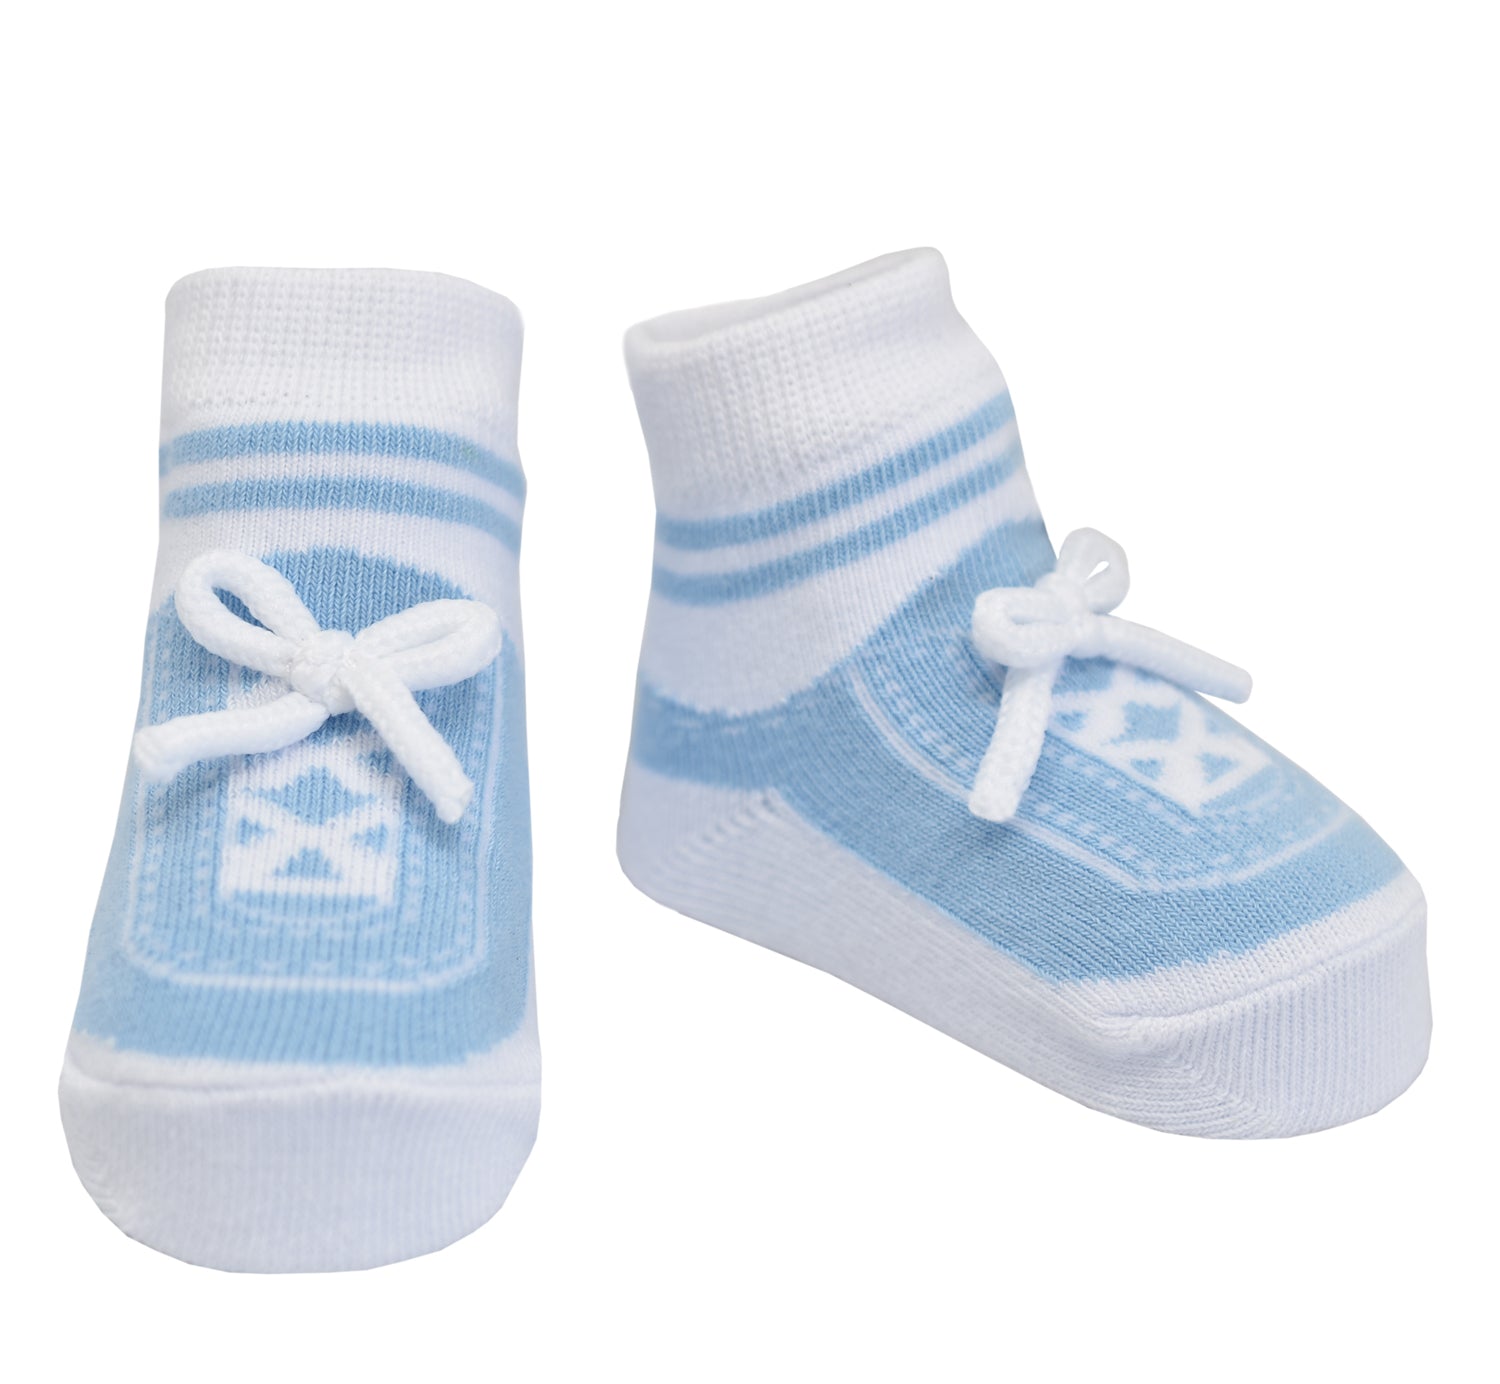 Little boy socks in light blue with shoelaces in a gift box